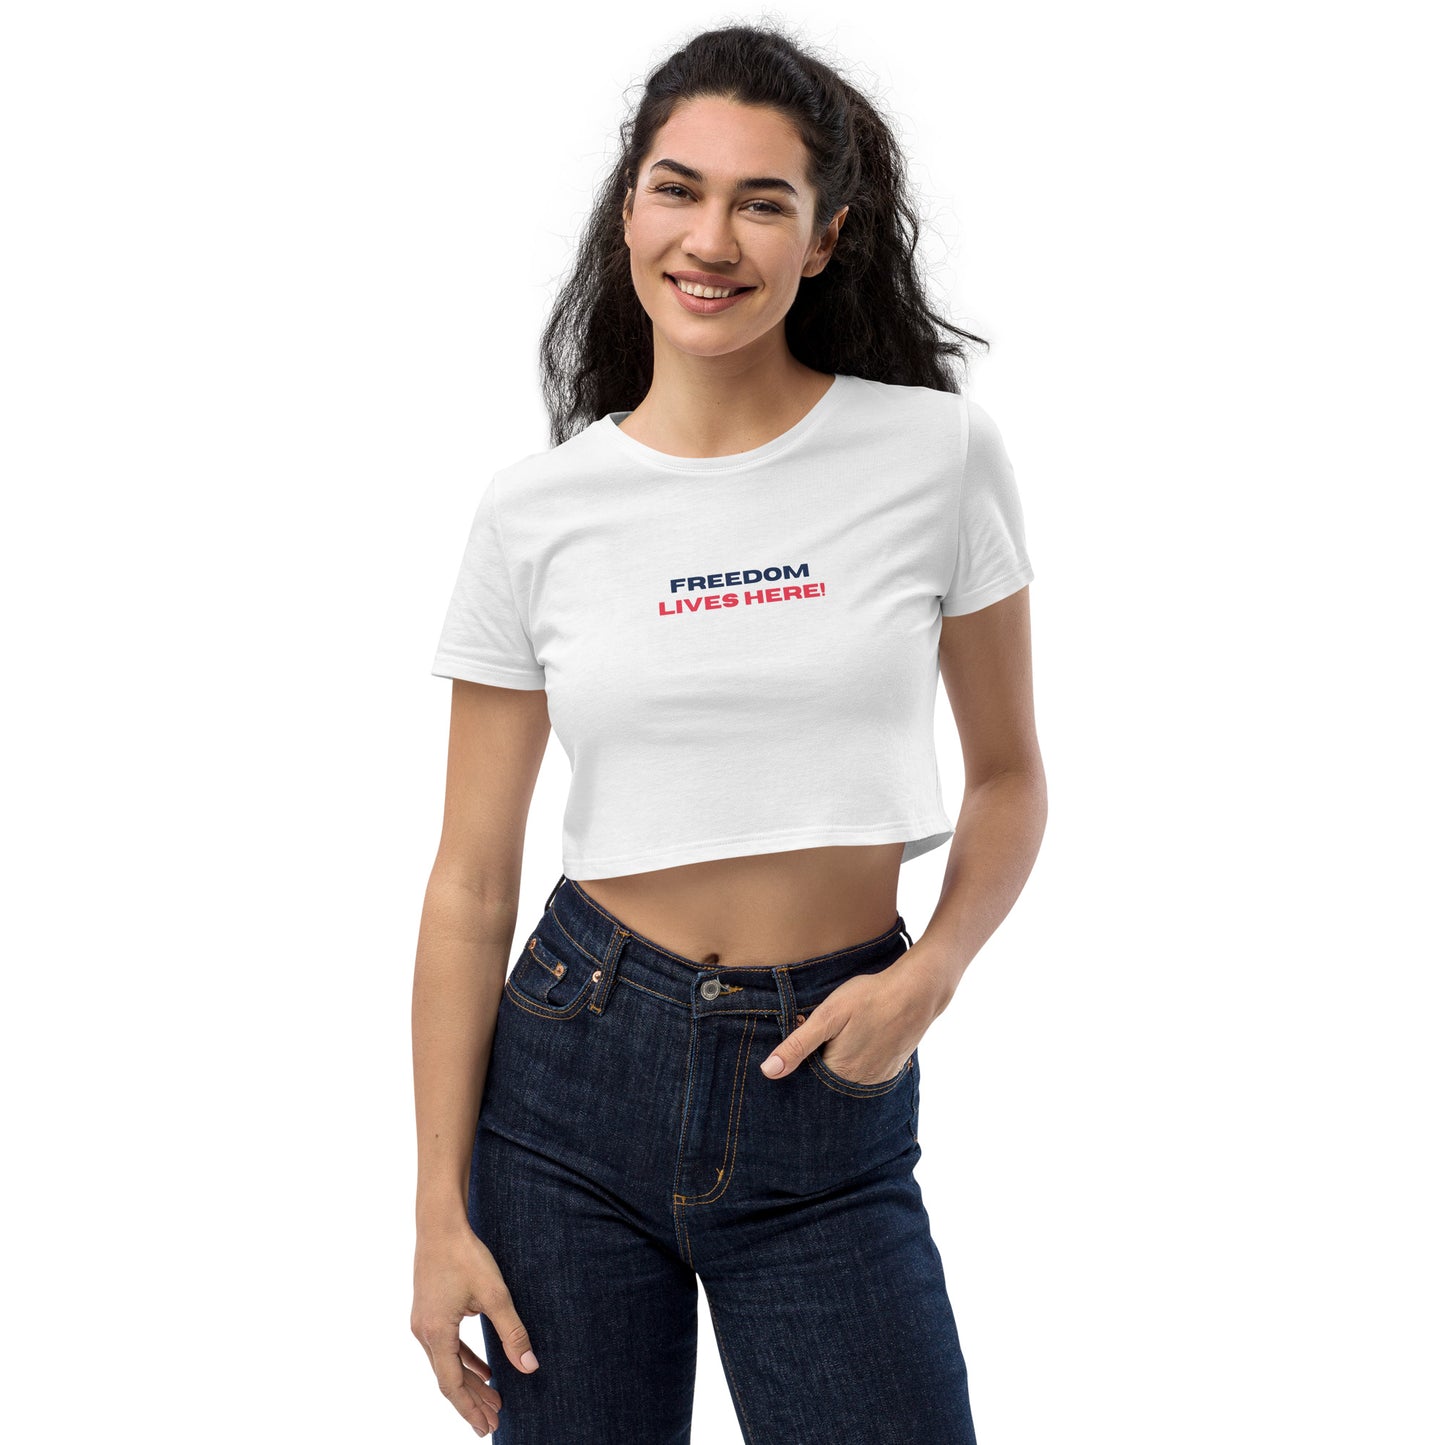 ORGANIC CROP TOP "FREEDOM LIVES HERE" WHITE FRONT - www.firstamericanstore.com